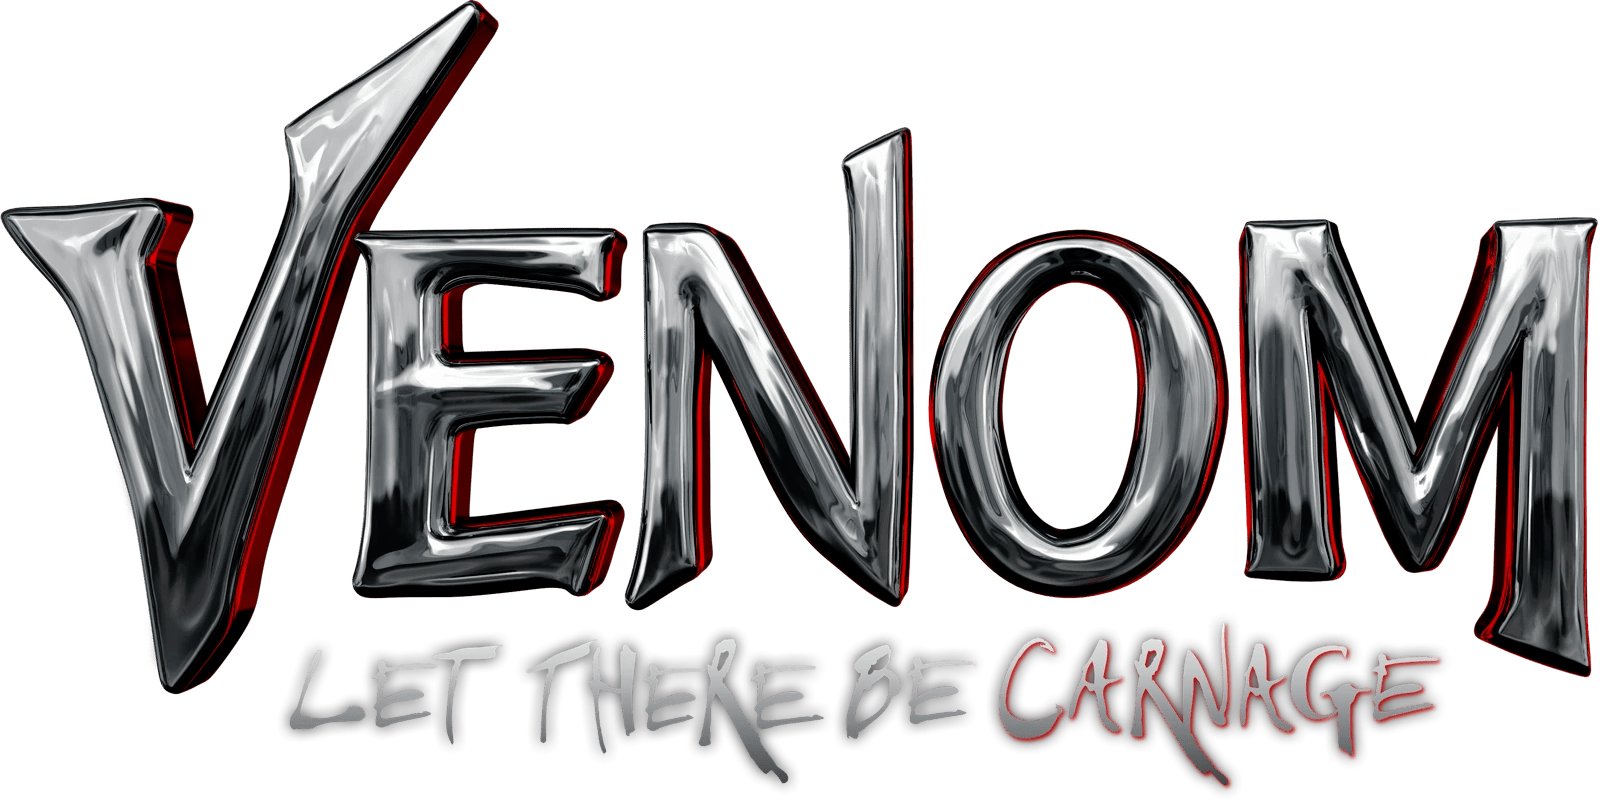 Venom let there be carnage logo